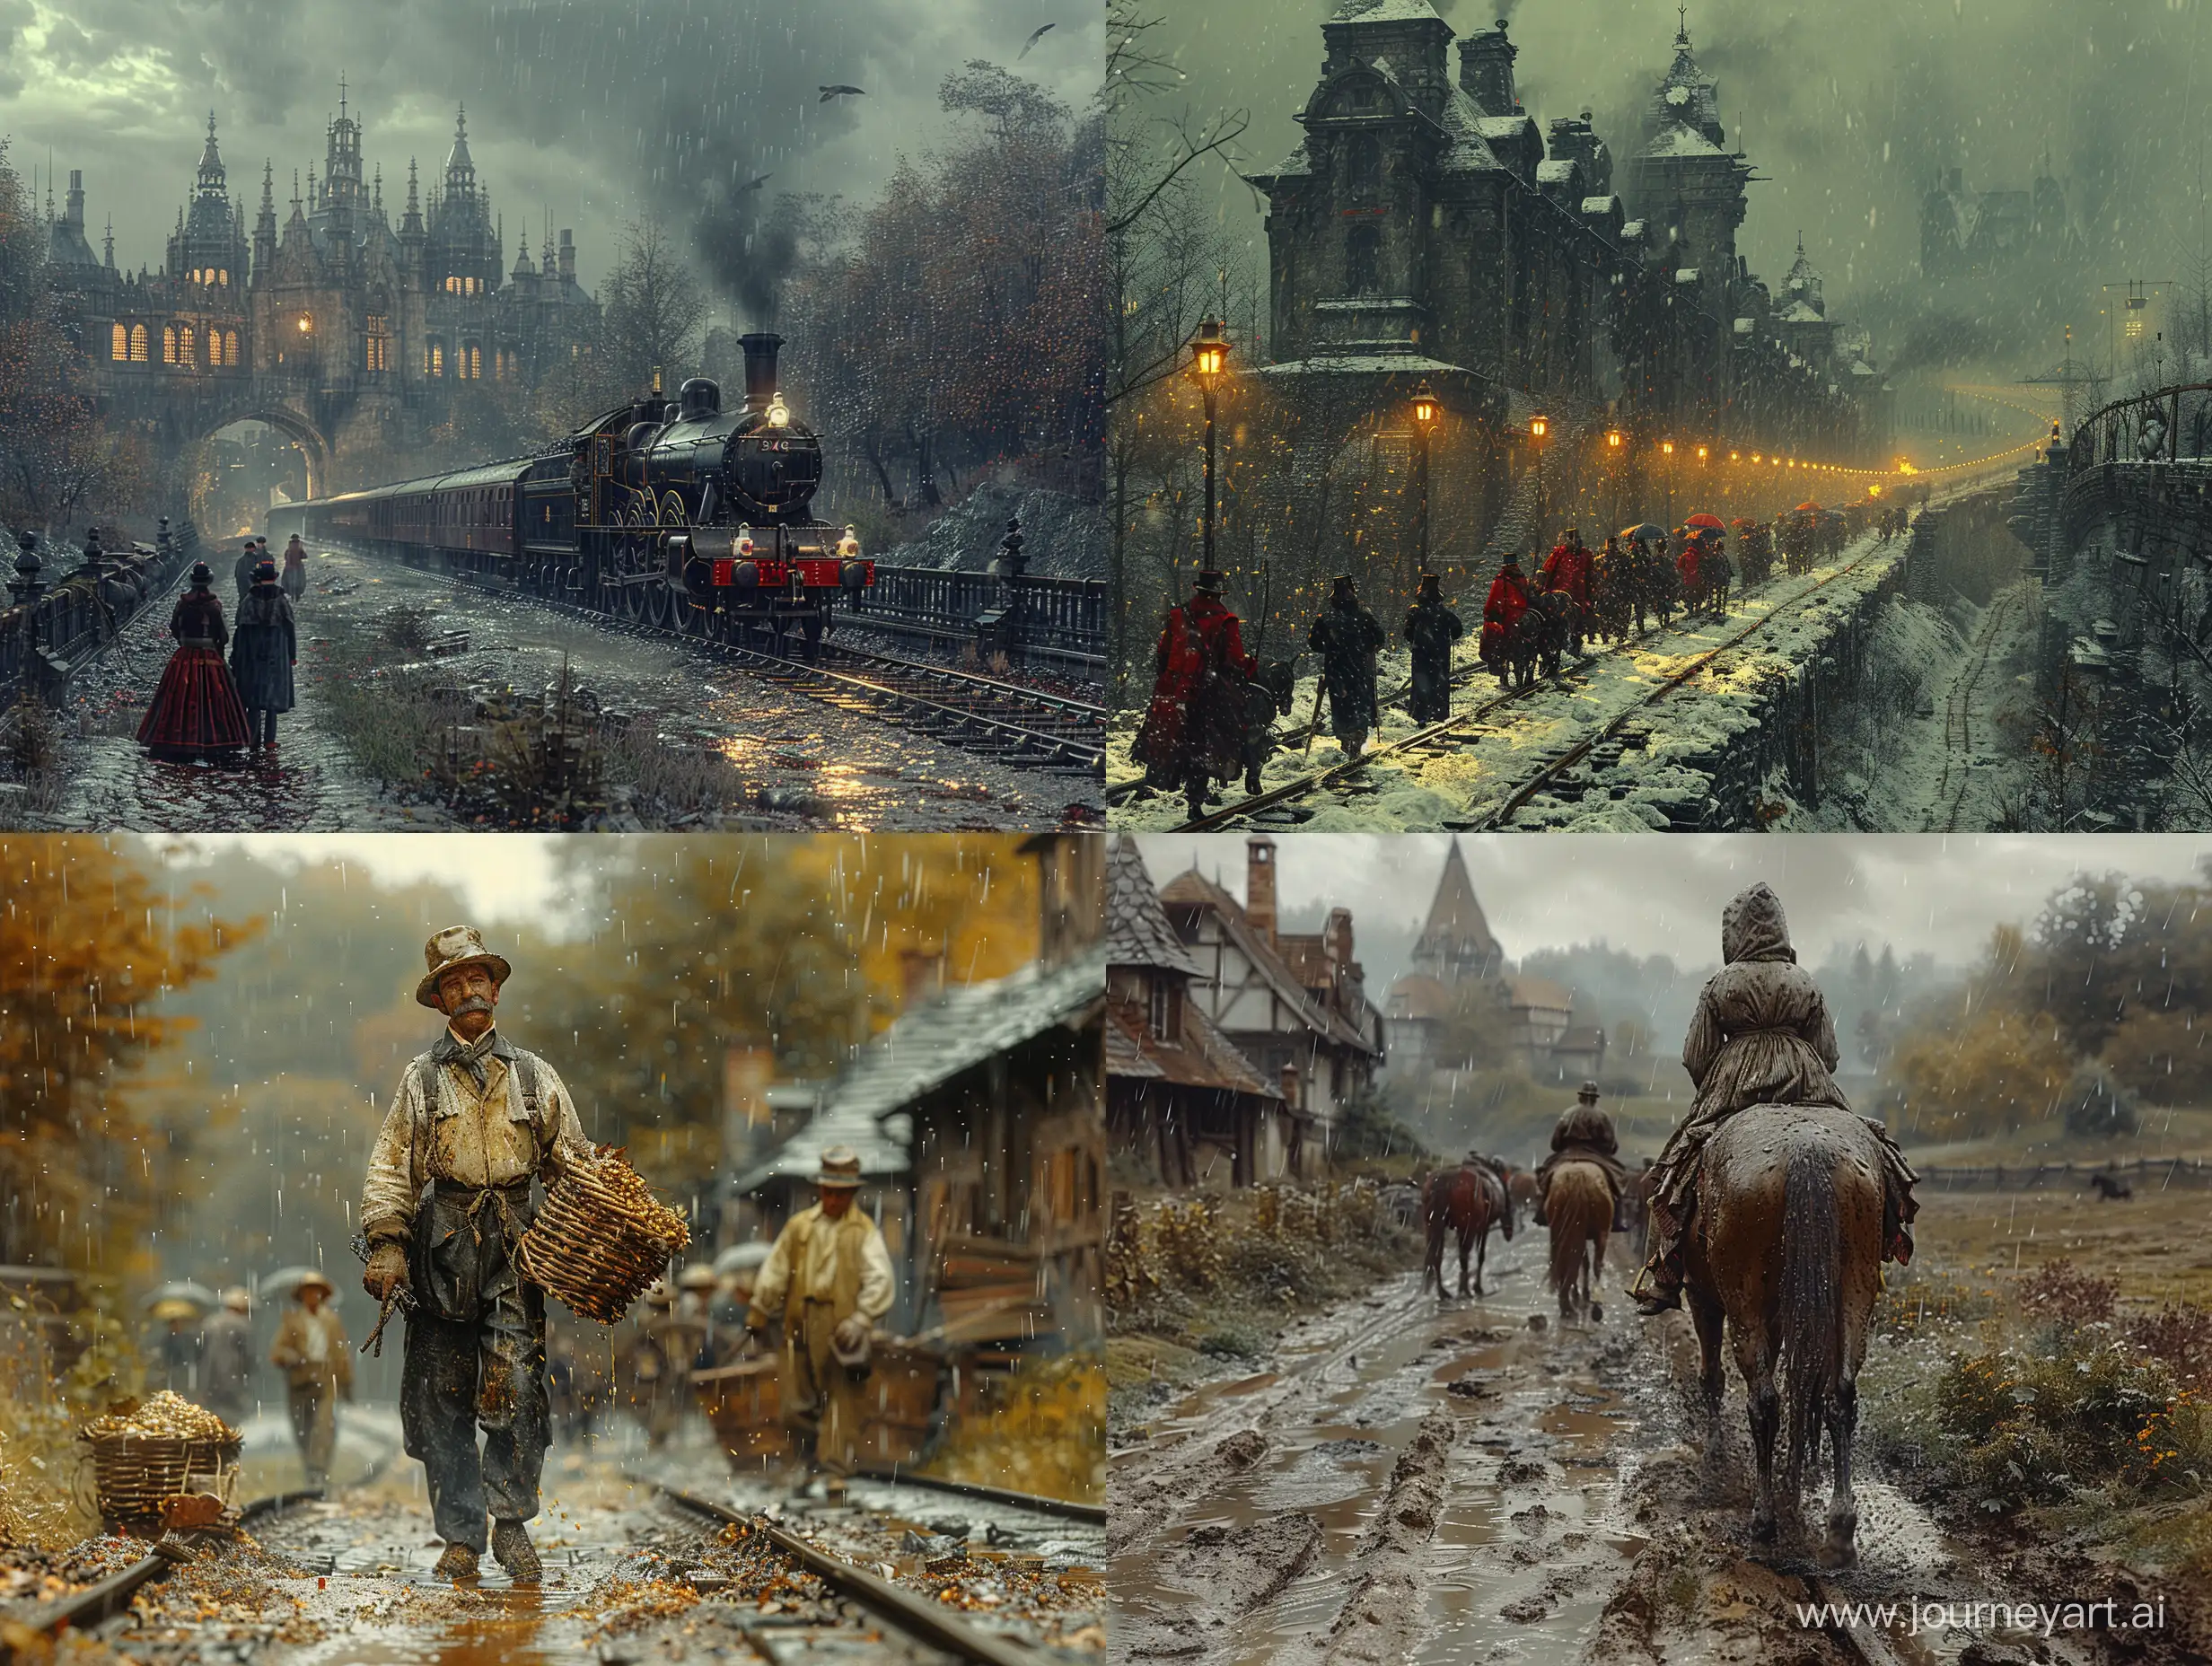 Railway-Workers-in-1845-Daily-Labor-in-the-Rain-with-Realistic-Details